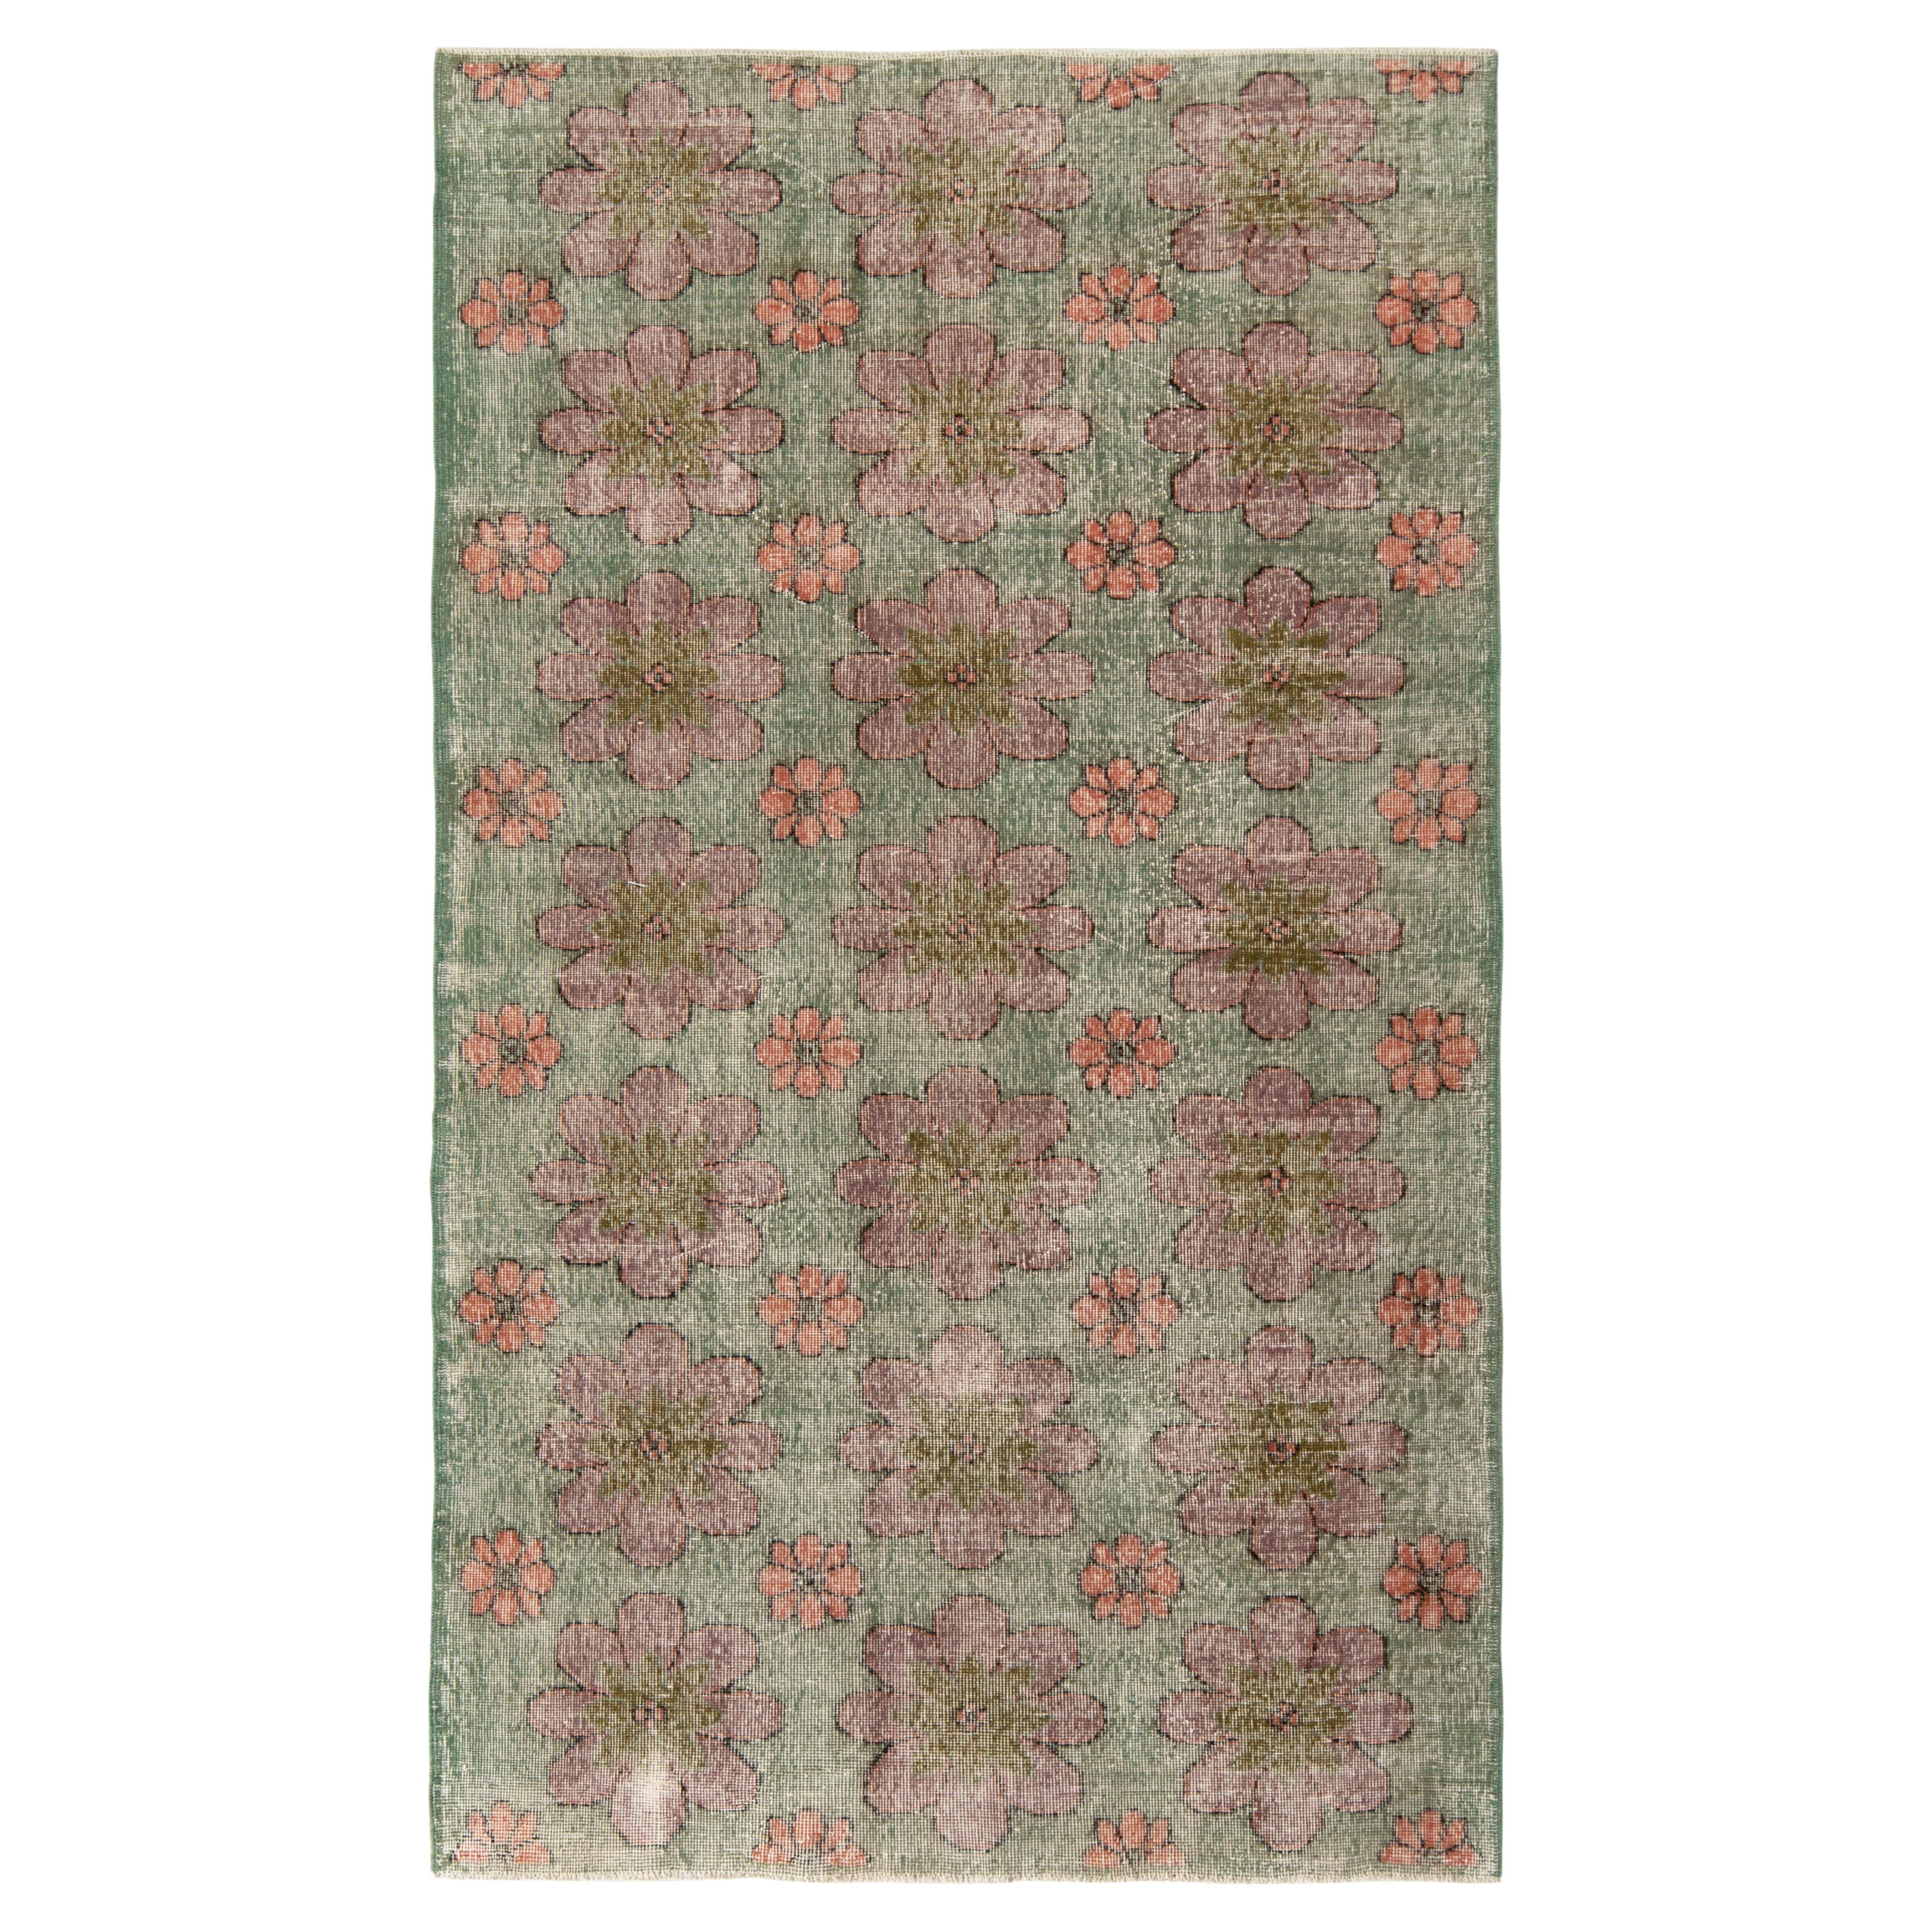 1960s Hand-Knotted Vintage Distressed Rug in Green Floral Pattern by Rug & Kilim